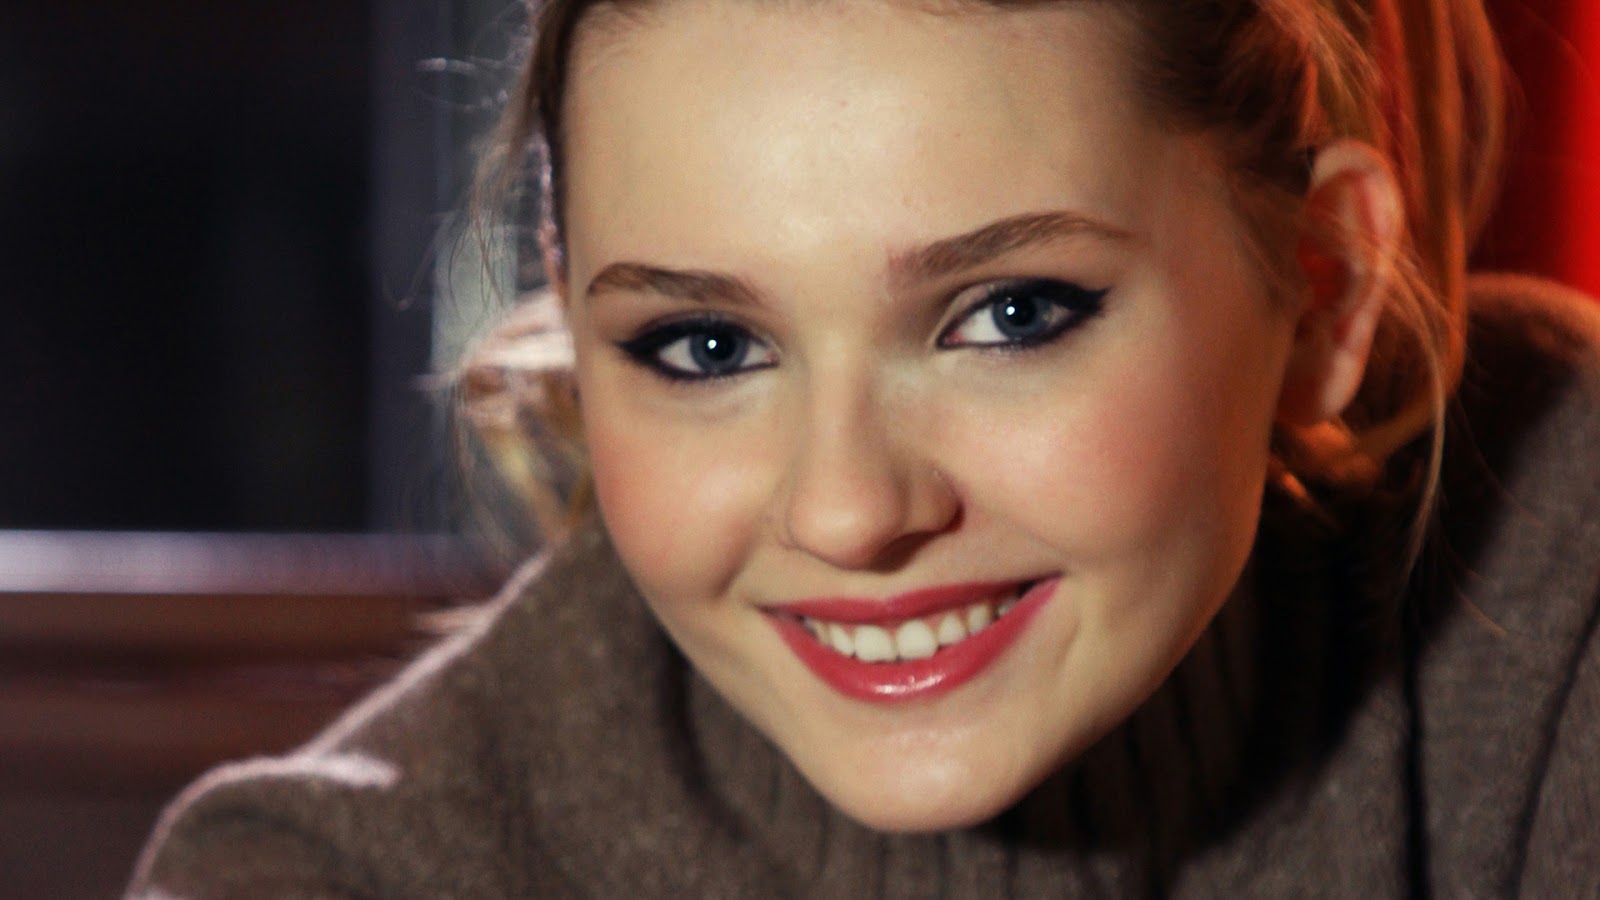 Hollywood Actress Abigail Breslin HD Images and Wallpapers